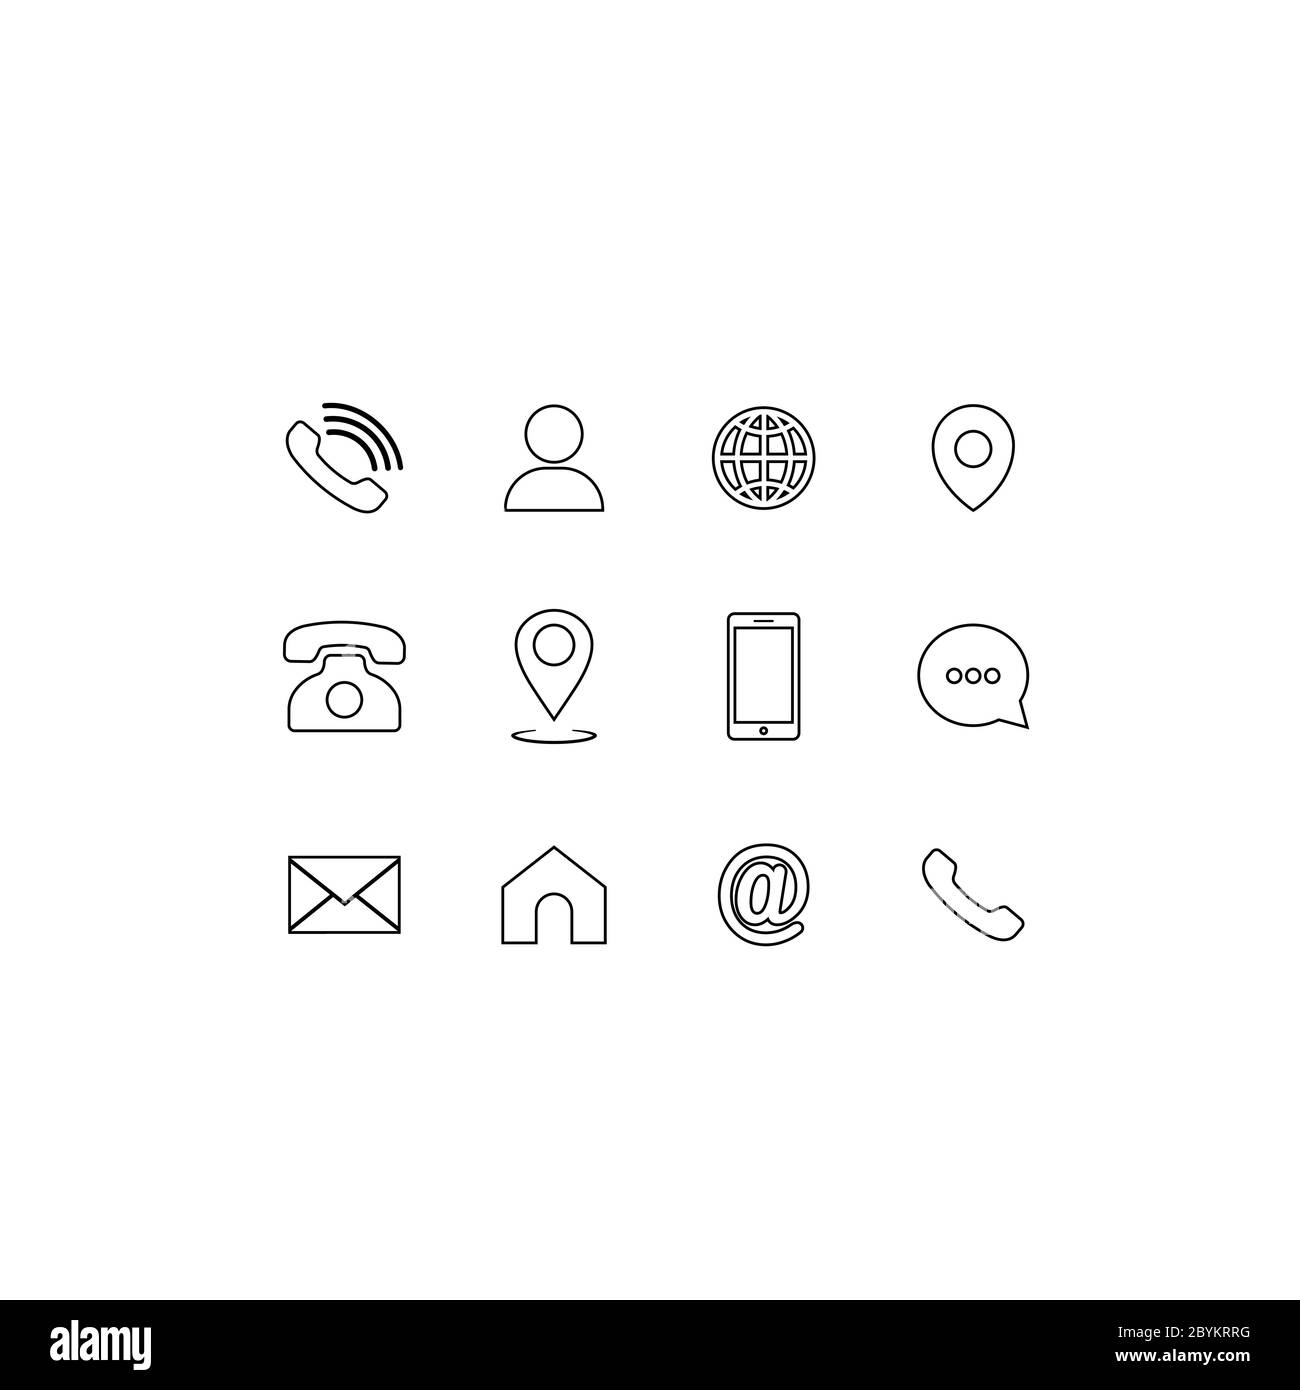 Set of communication icons set modern button . Phone, mobile phone, mail on isolated background for applications, web, app. EPS 10 vector. Stock Vector